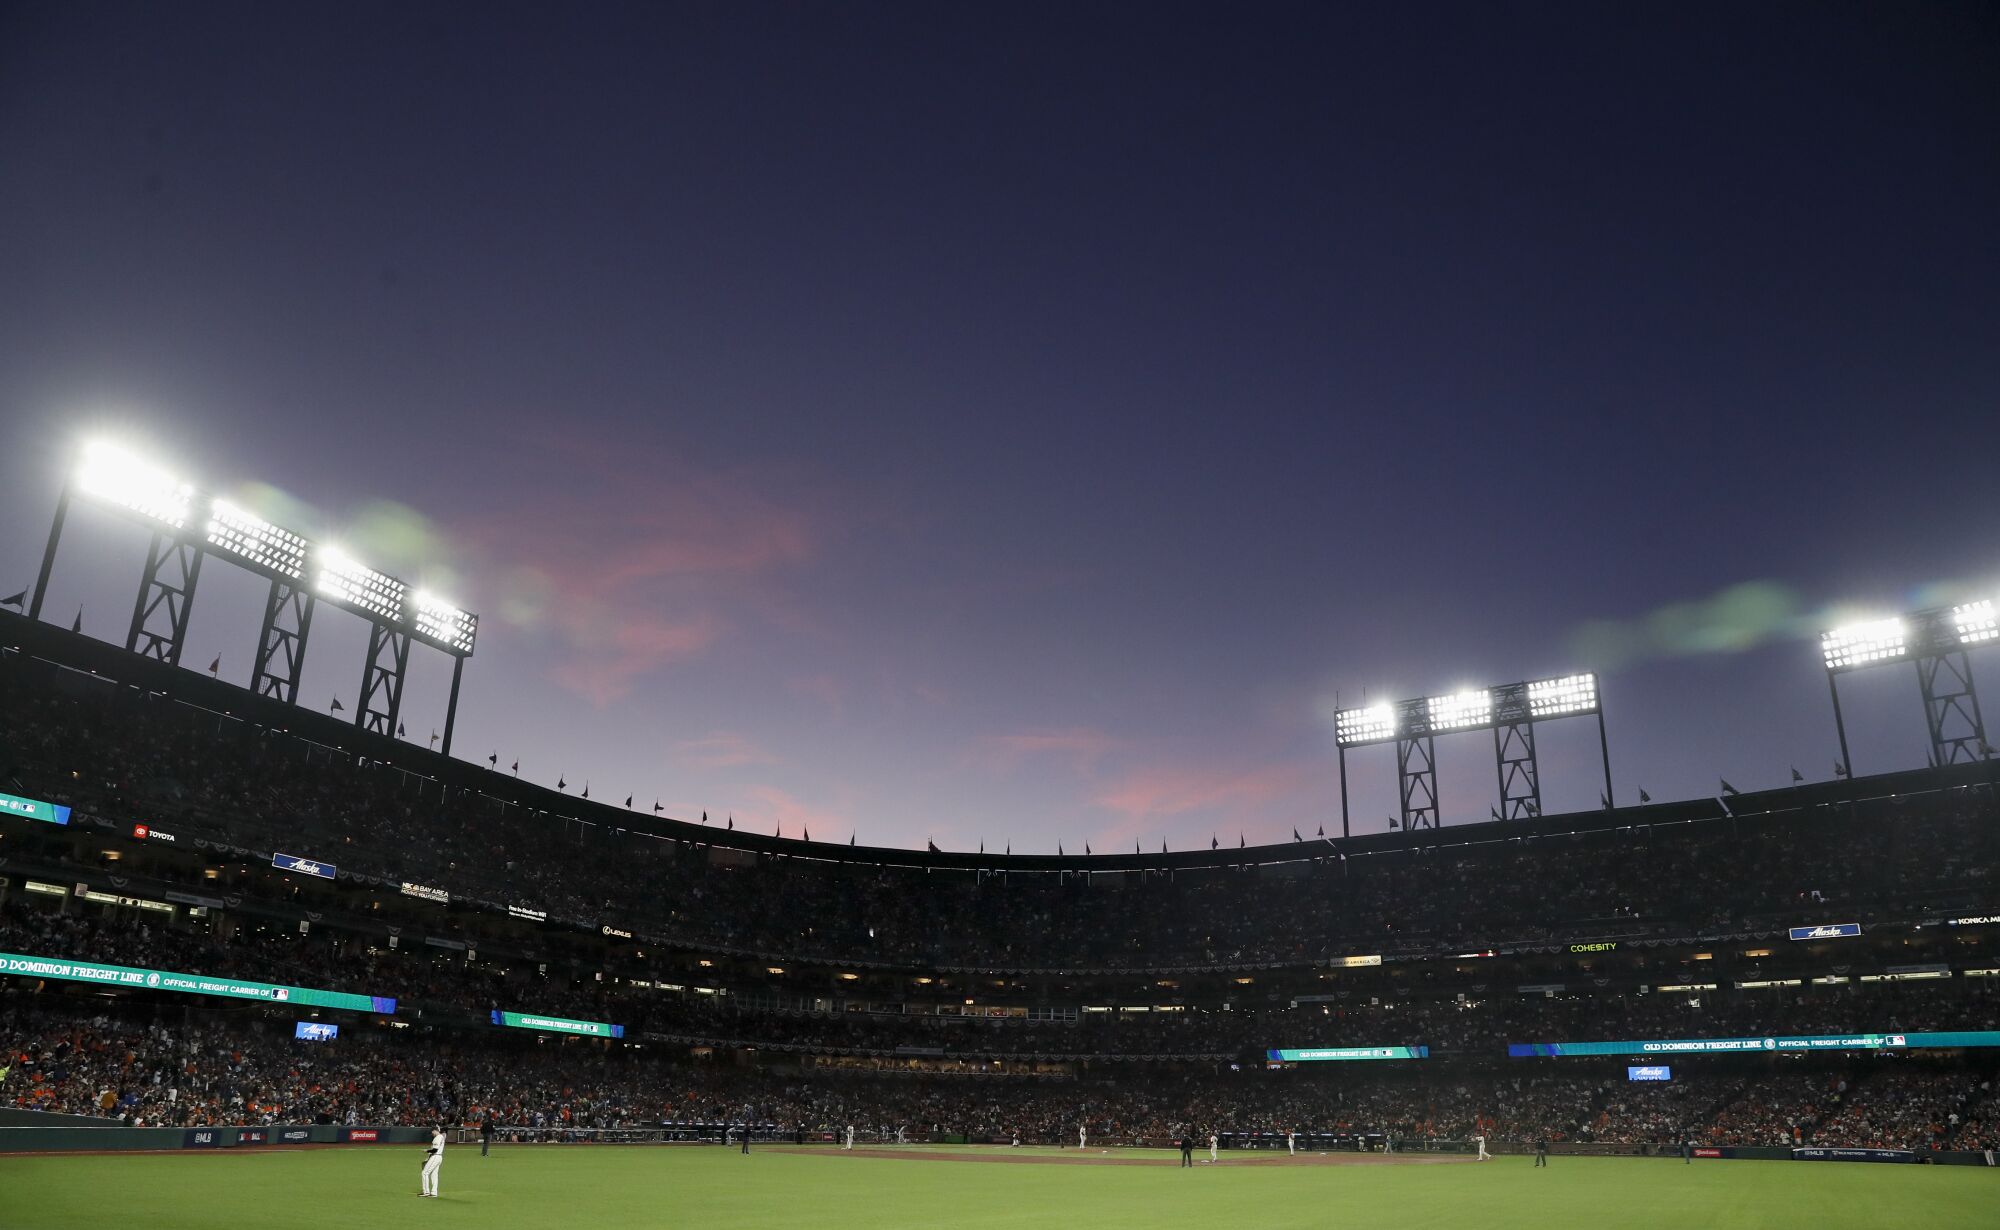 The sun sets behind the stands at Oracle Park